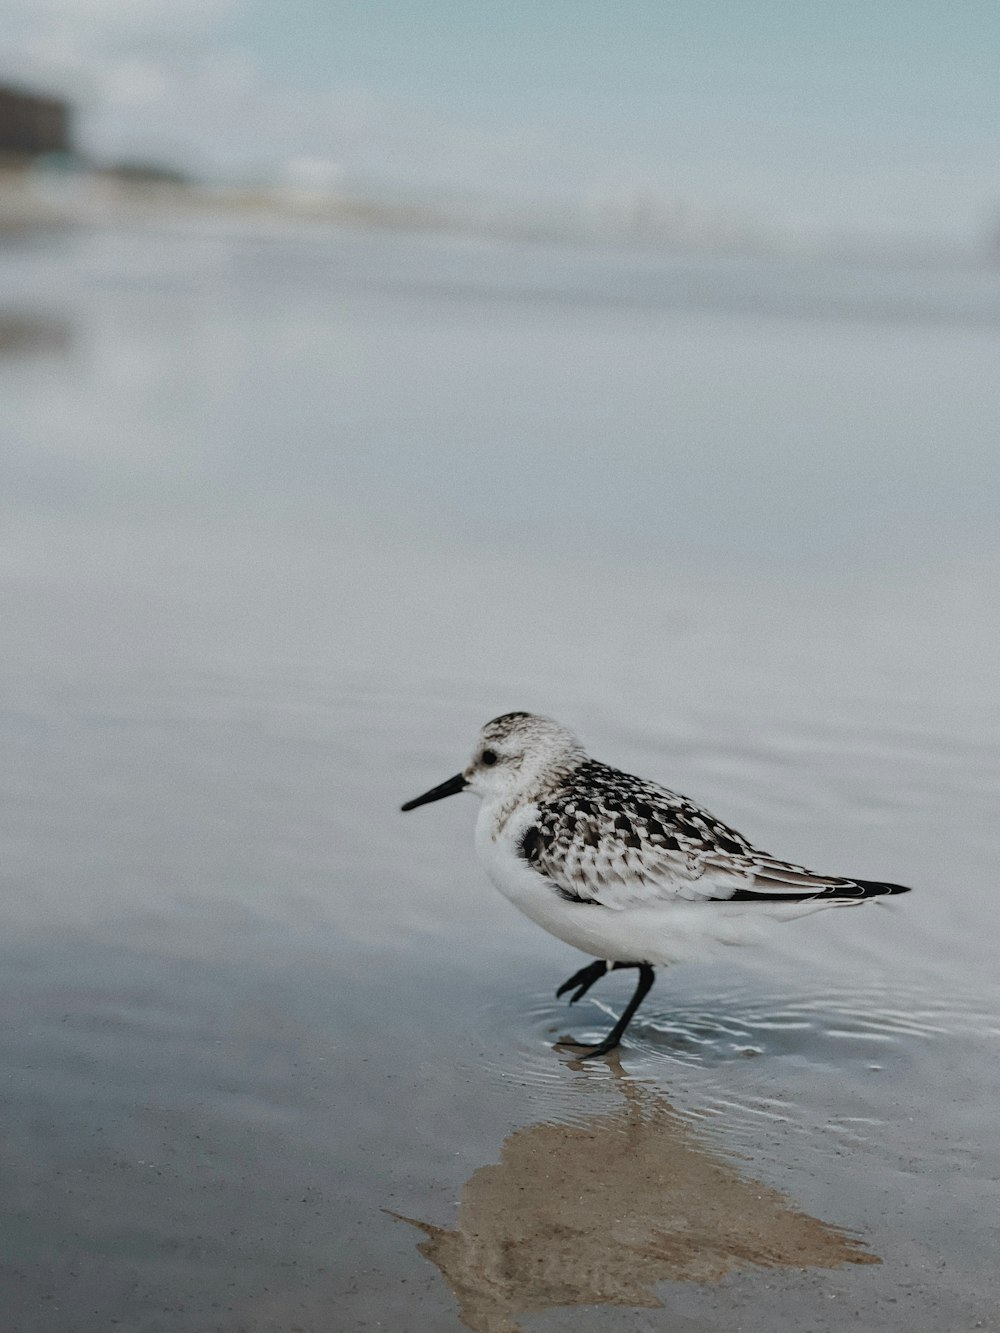 a small bird is standing in the shallow water